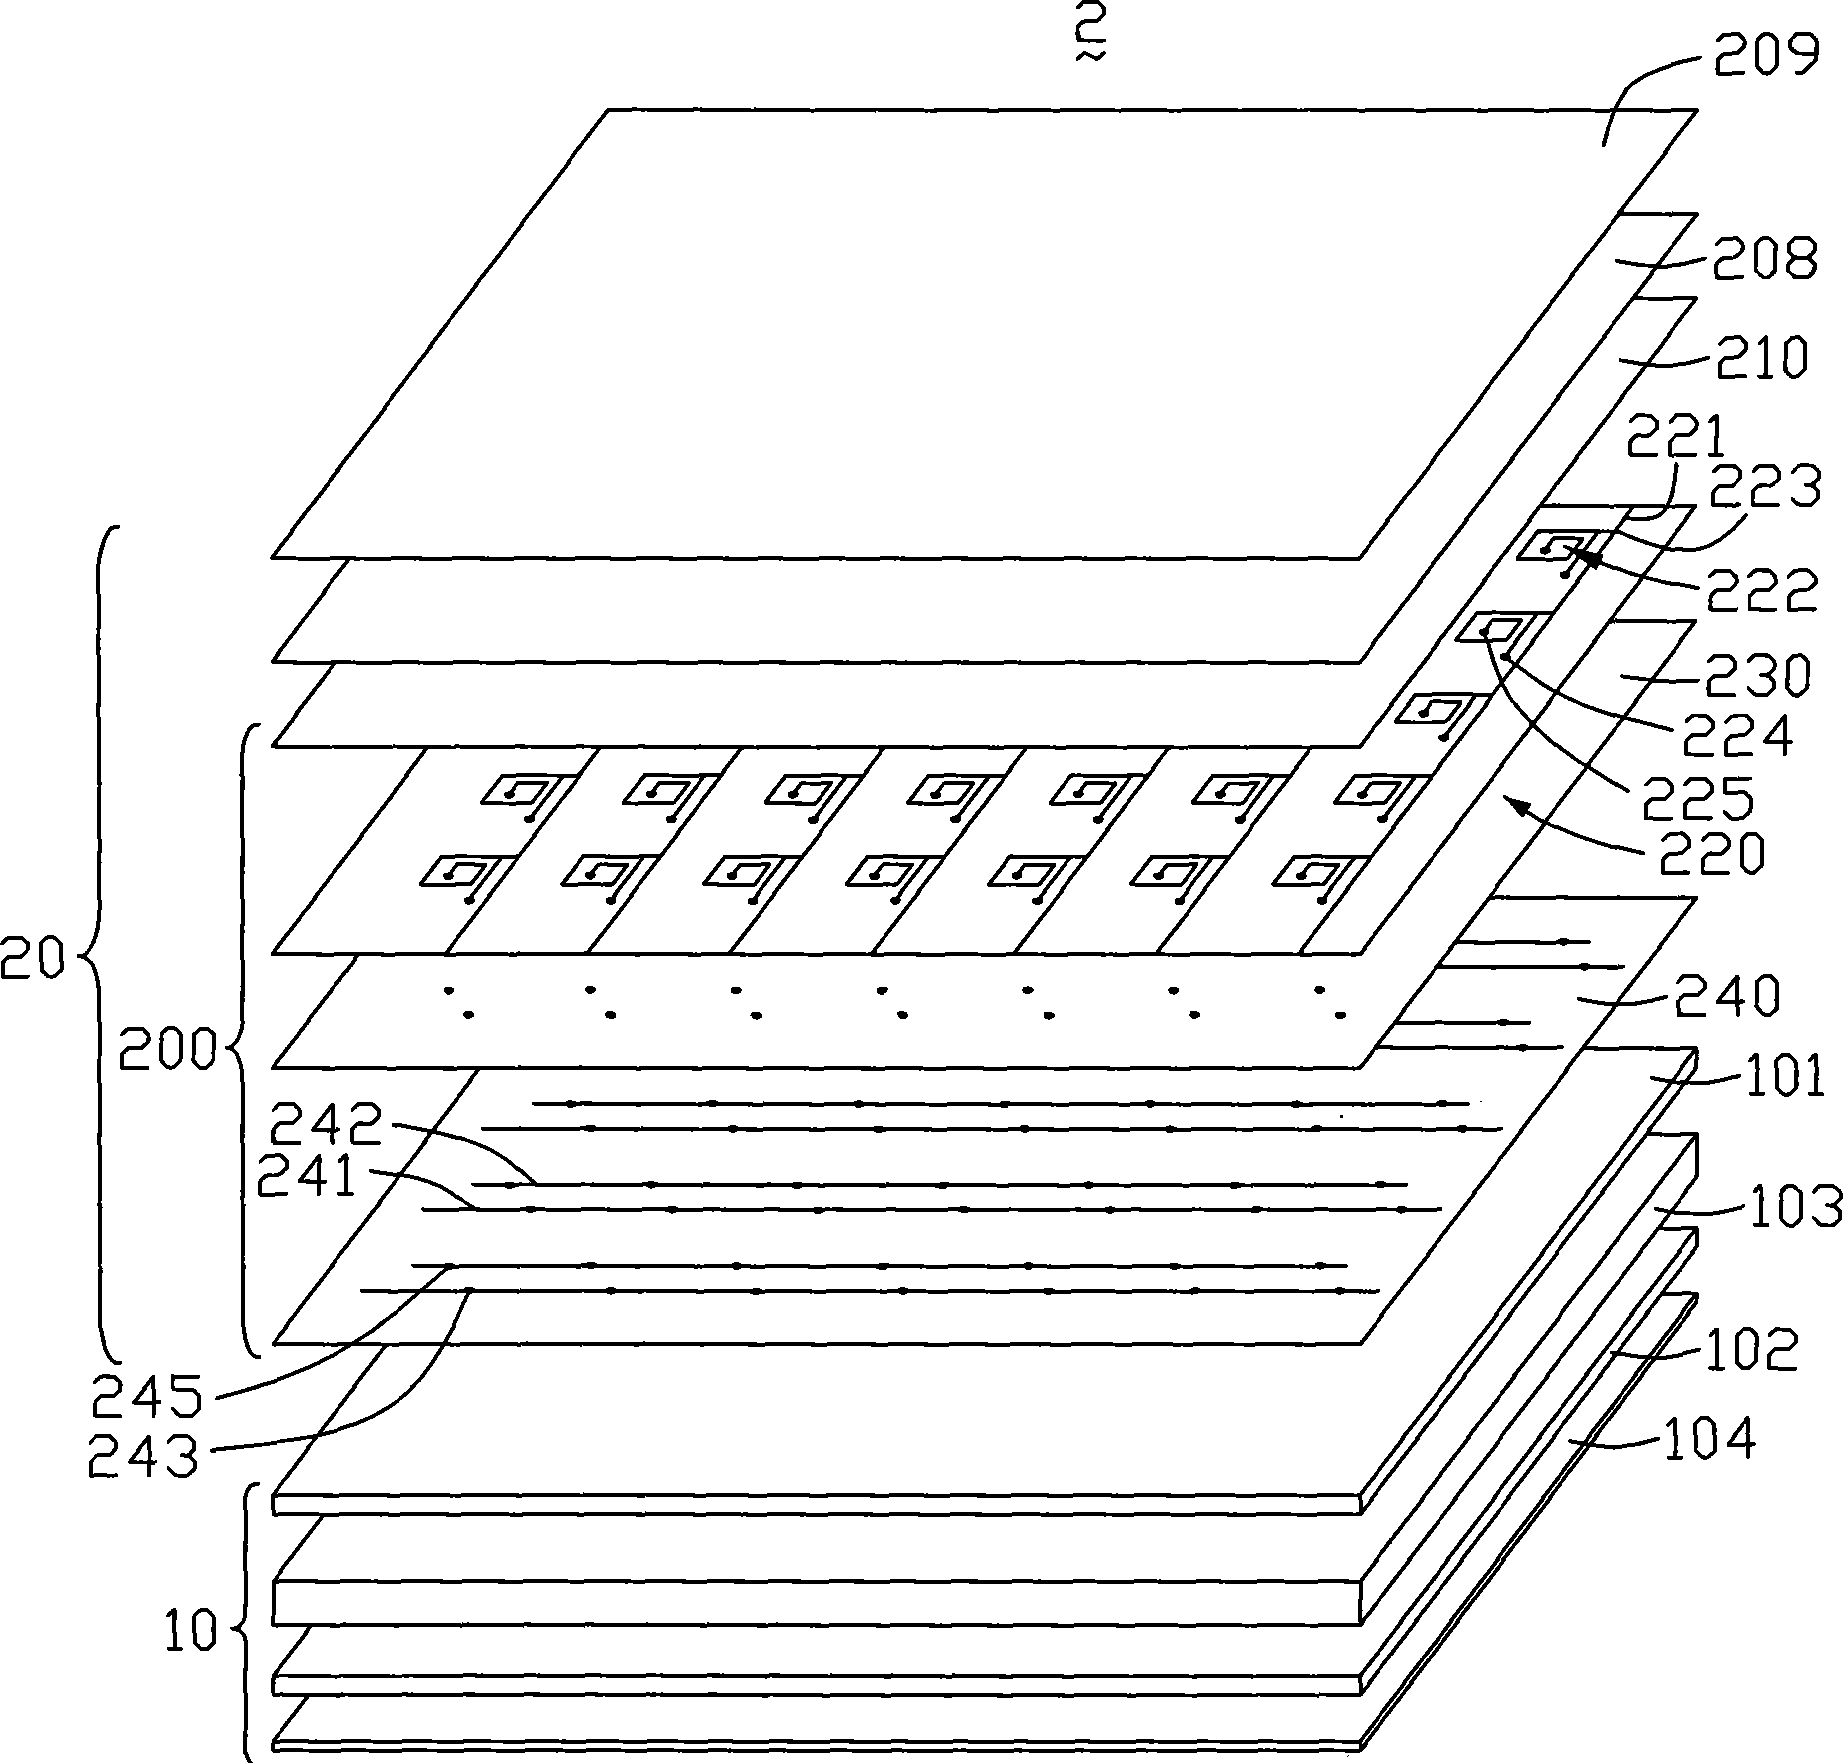 Touch-control liquid crystal display device